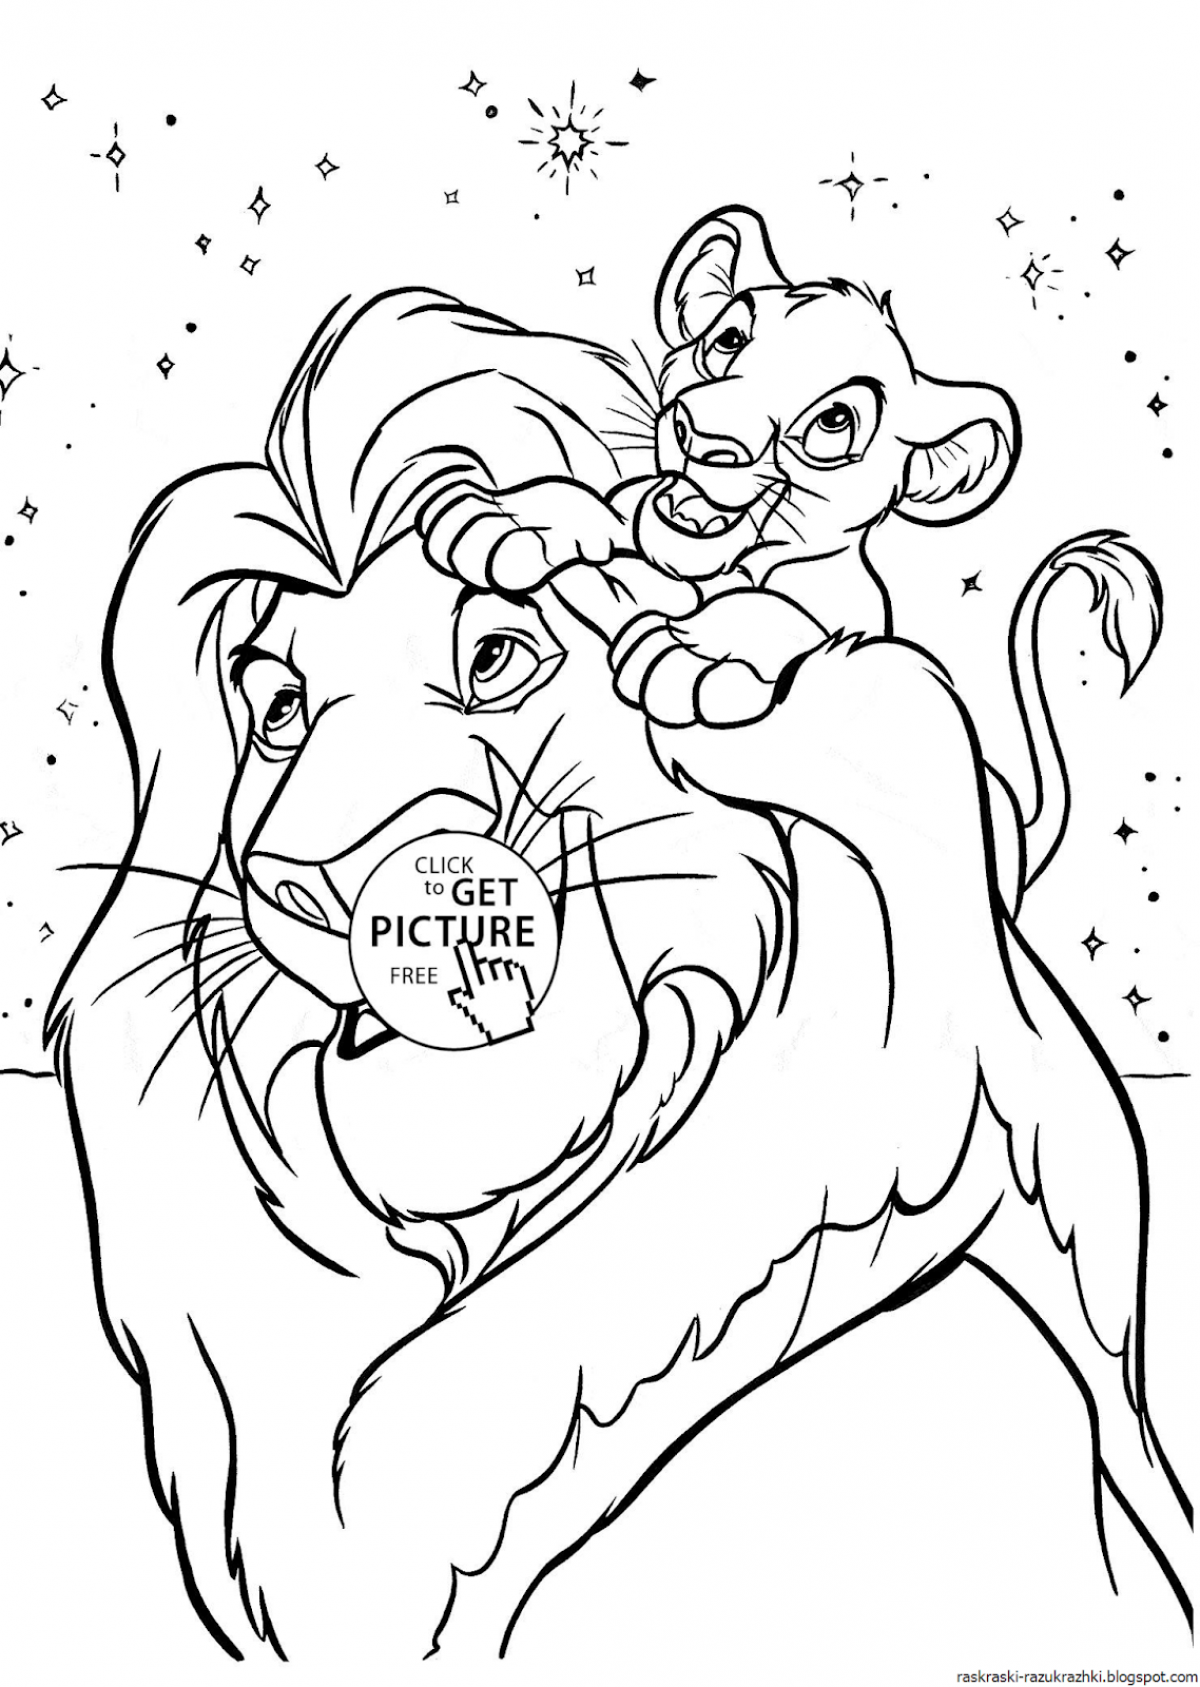 Fancy lion king coloring book for kids